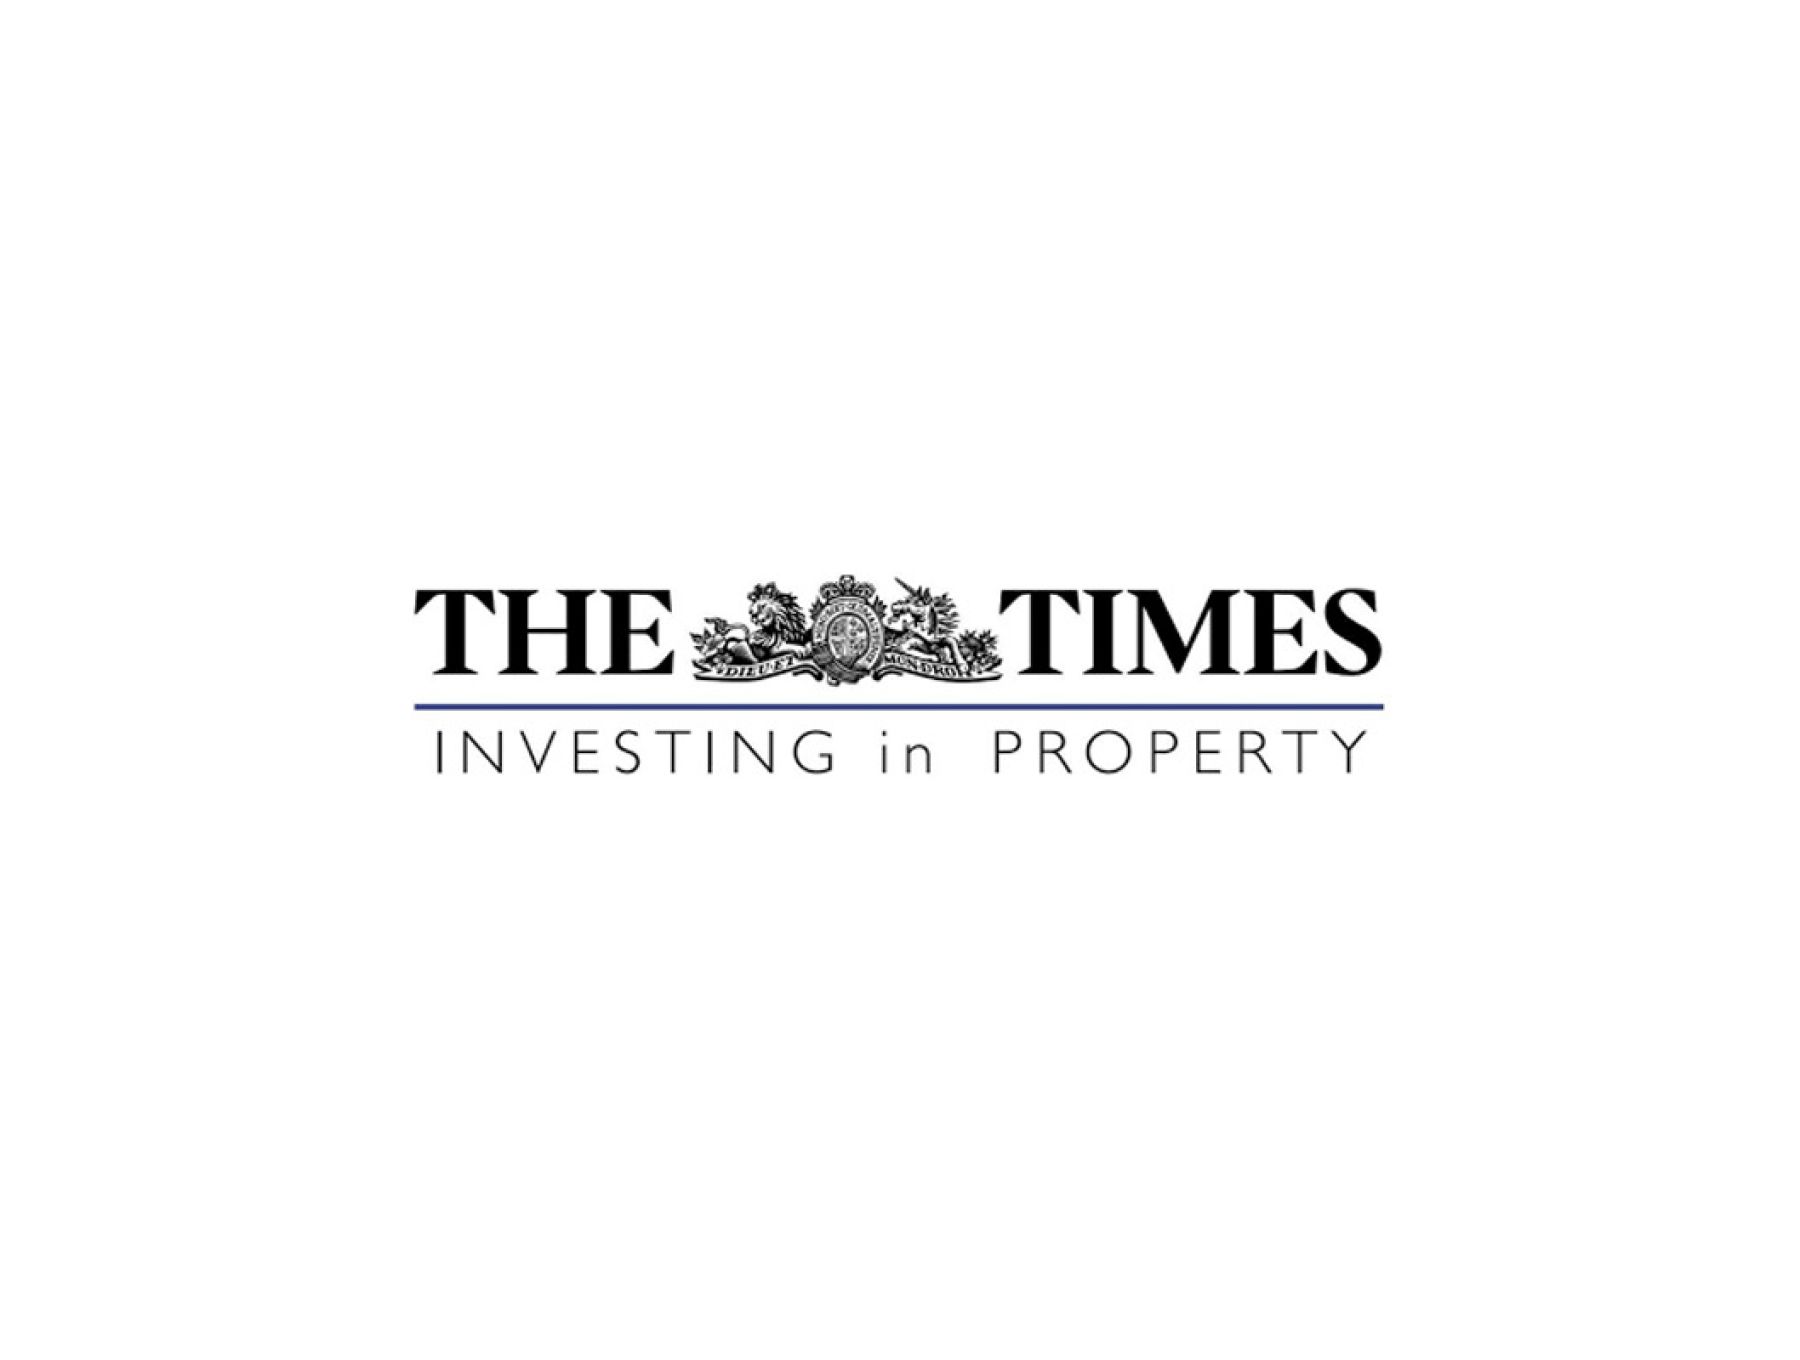 The Times – Investing in Property coverage of One United Properties business prospects